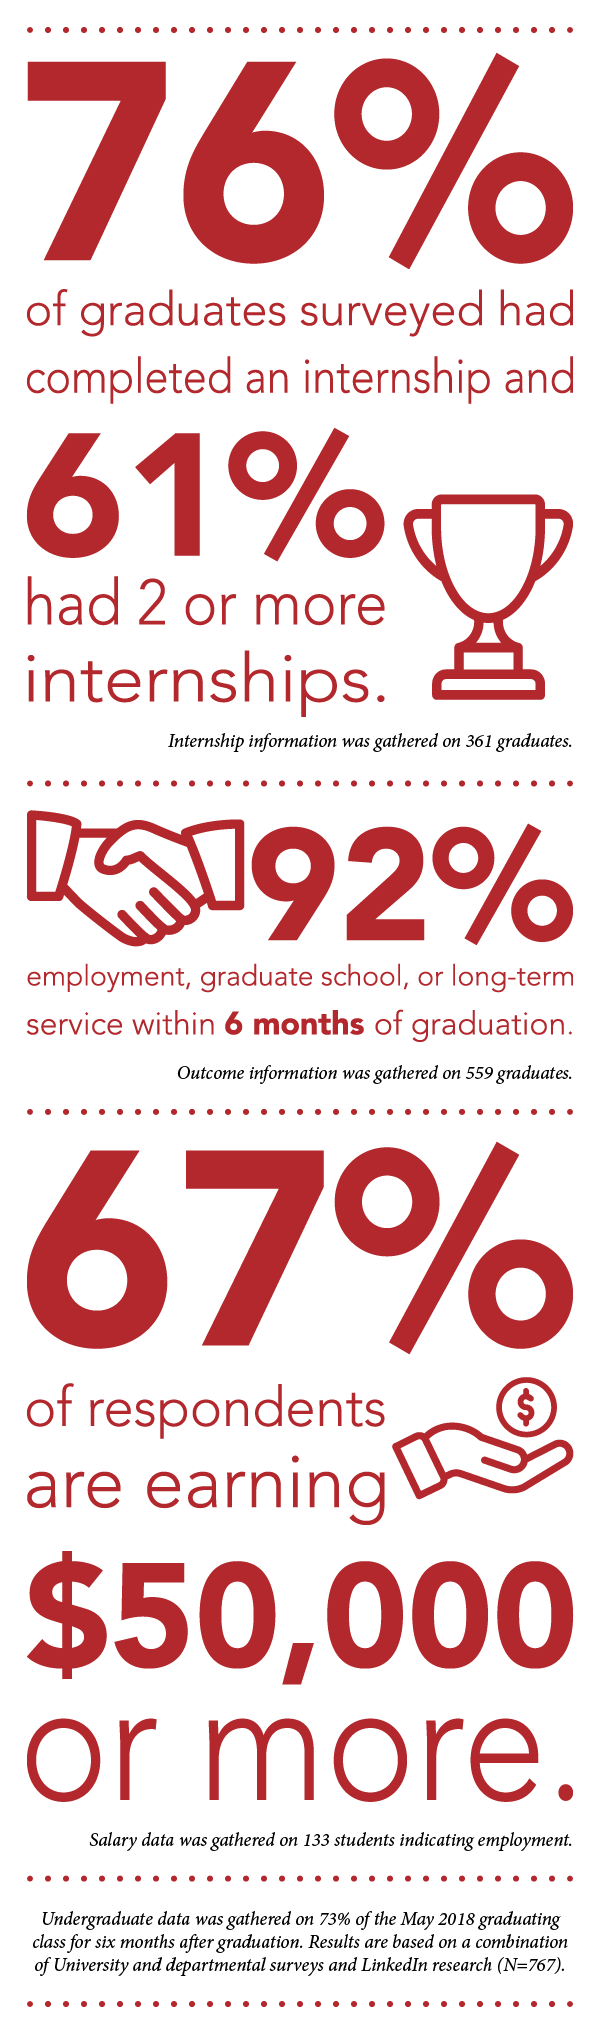 Graphic showing 76% of graduates had an  internship, 61% had 2 or more;  92% were employed, in grad school, or in long-term-service within 6 months of graduating; 67% were earning $50,000 or more.